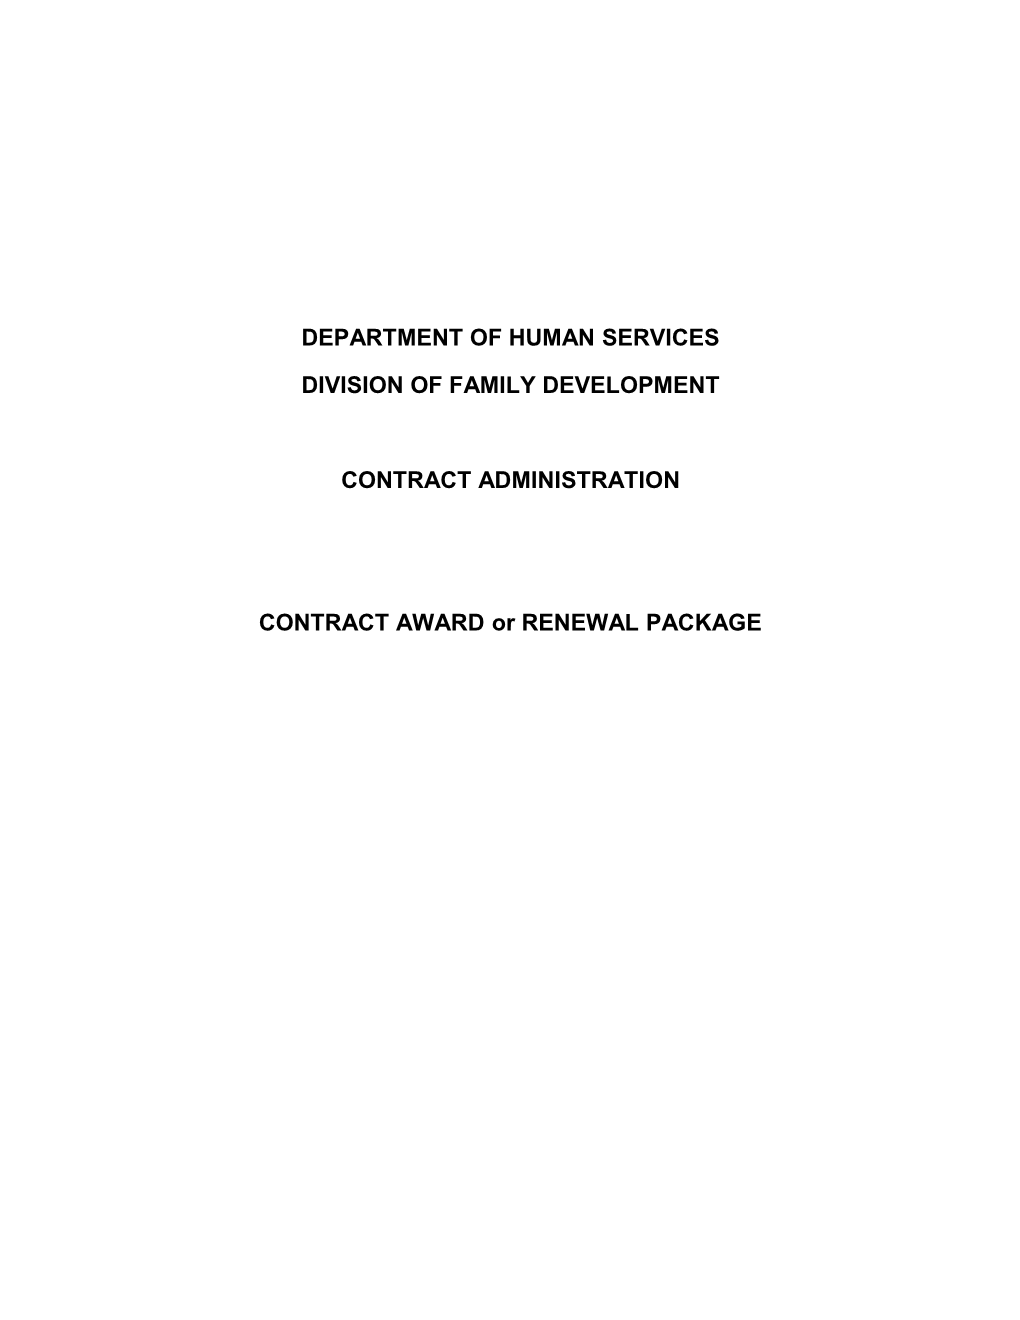 Department of Human Services s5